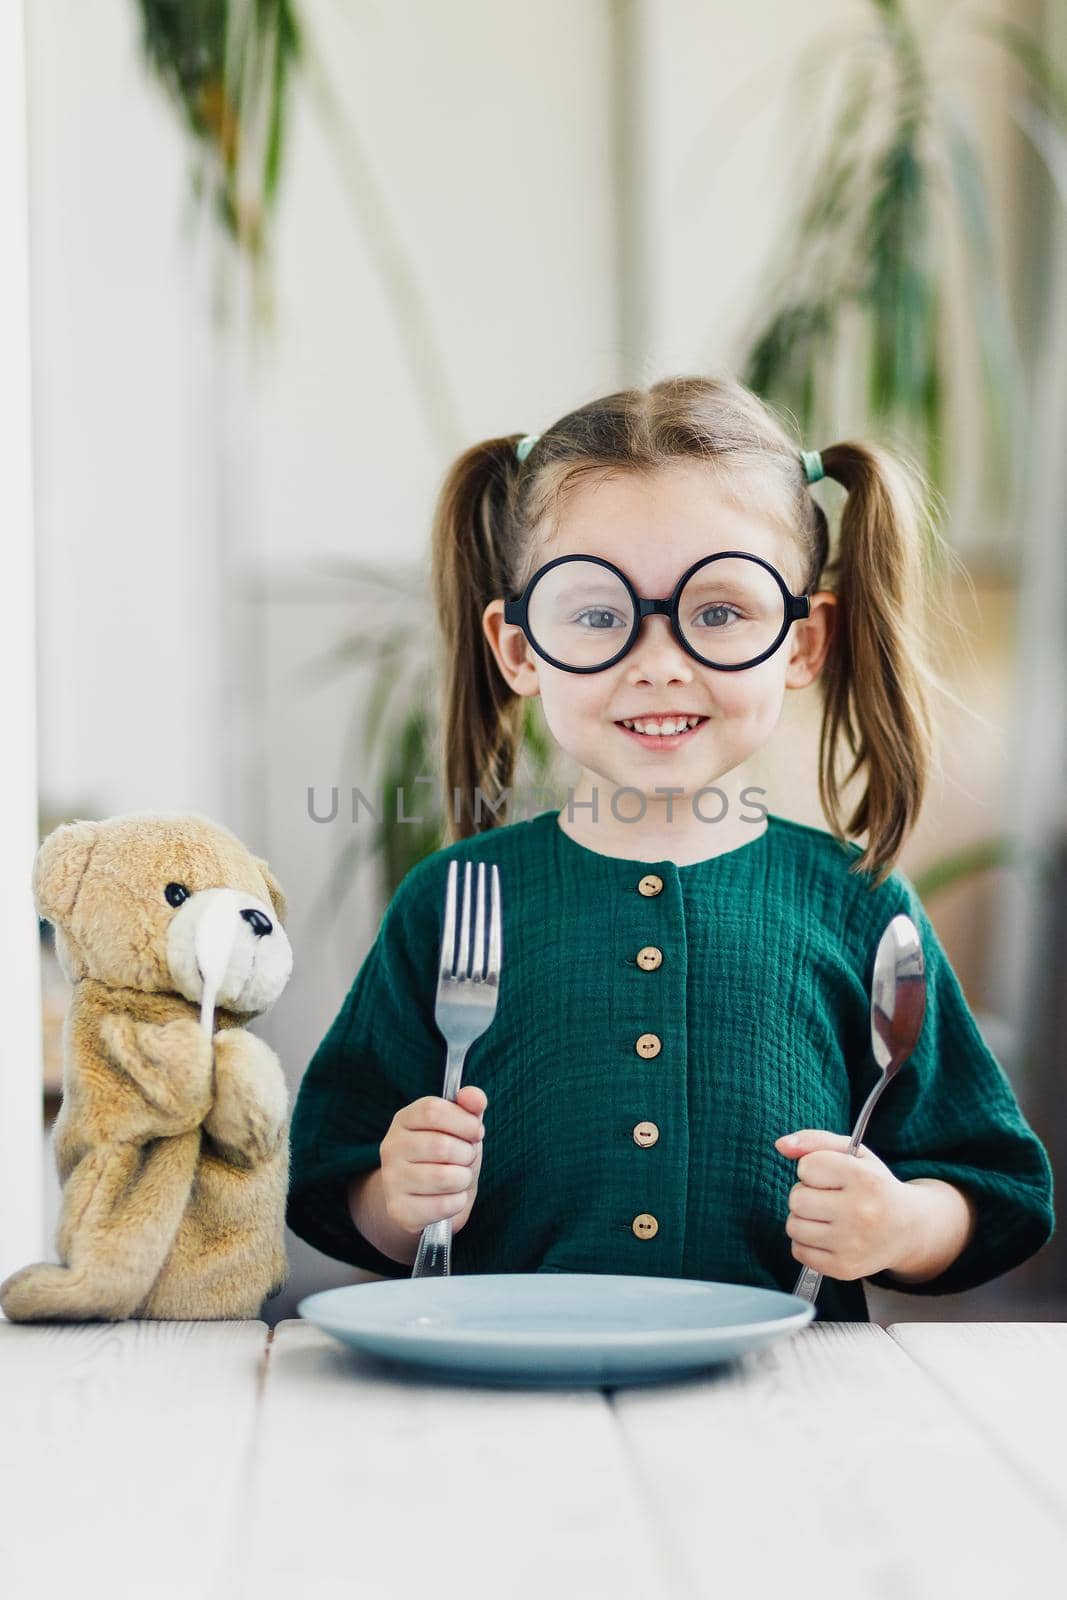 Little beautiful girl in green muslin dress waiting breakfast with bear toy. Little cute girl at white dining table in kitchen. Healthy nutrition for young kids.